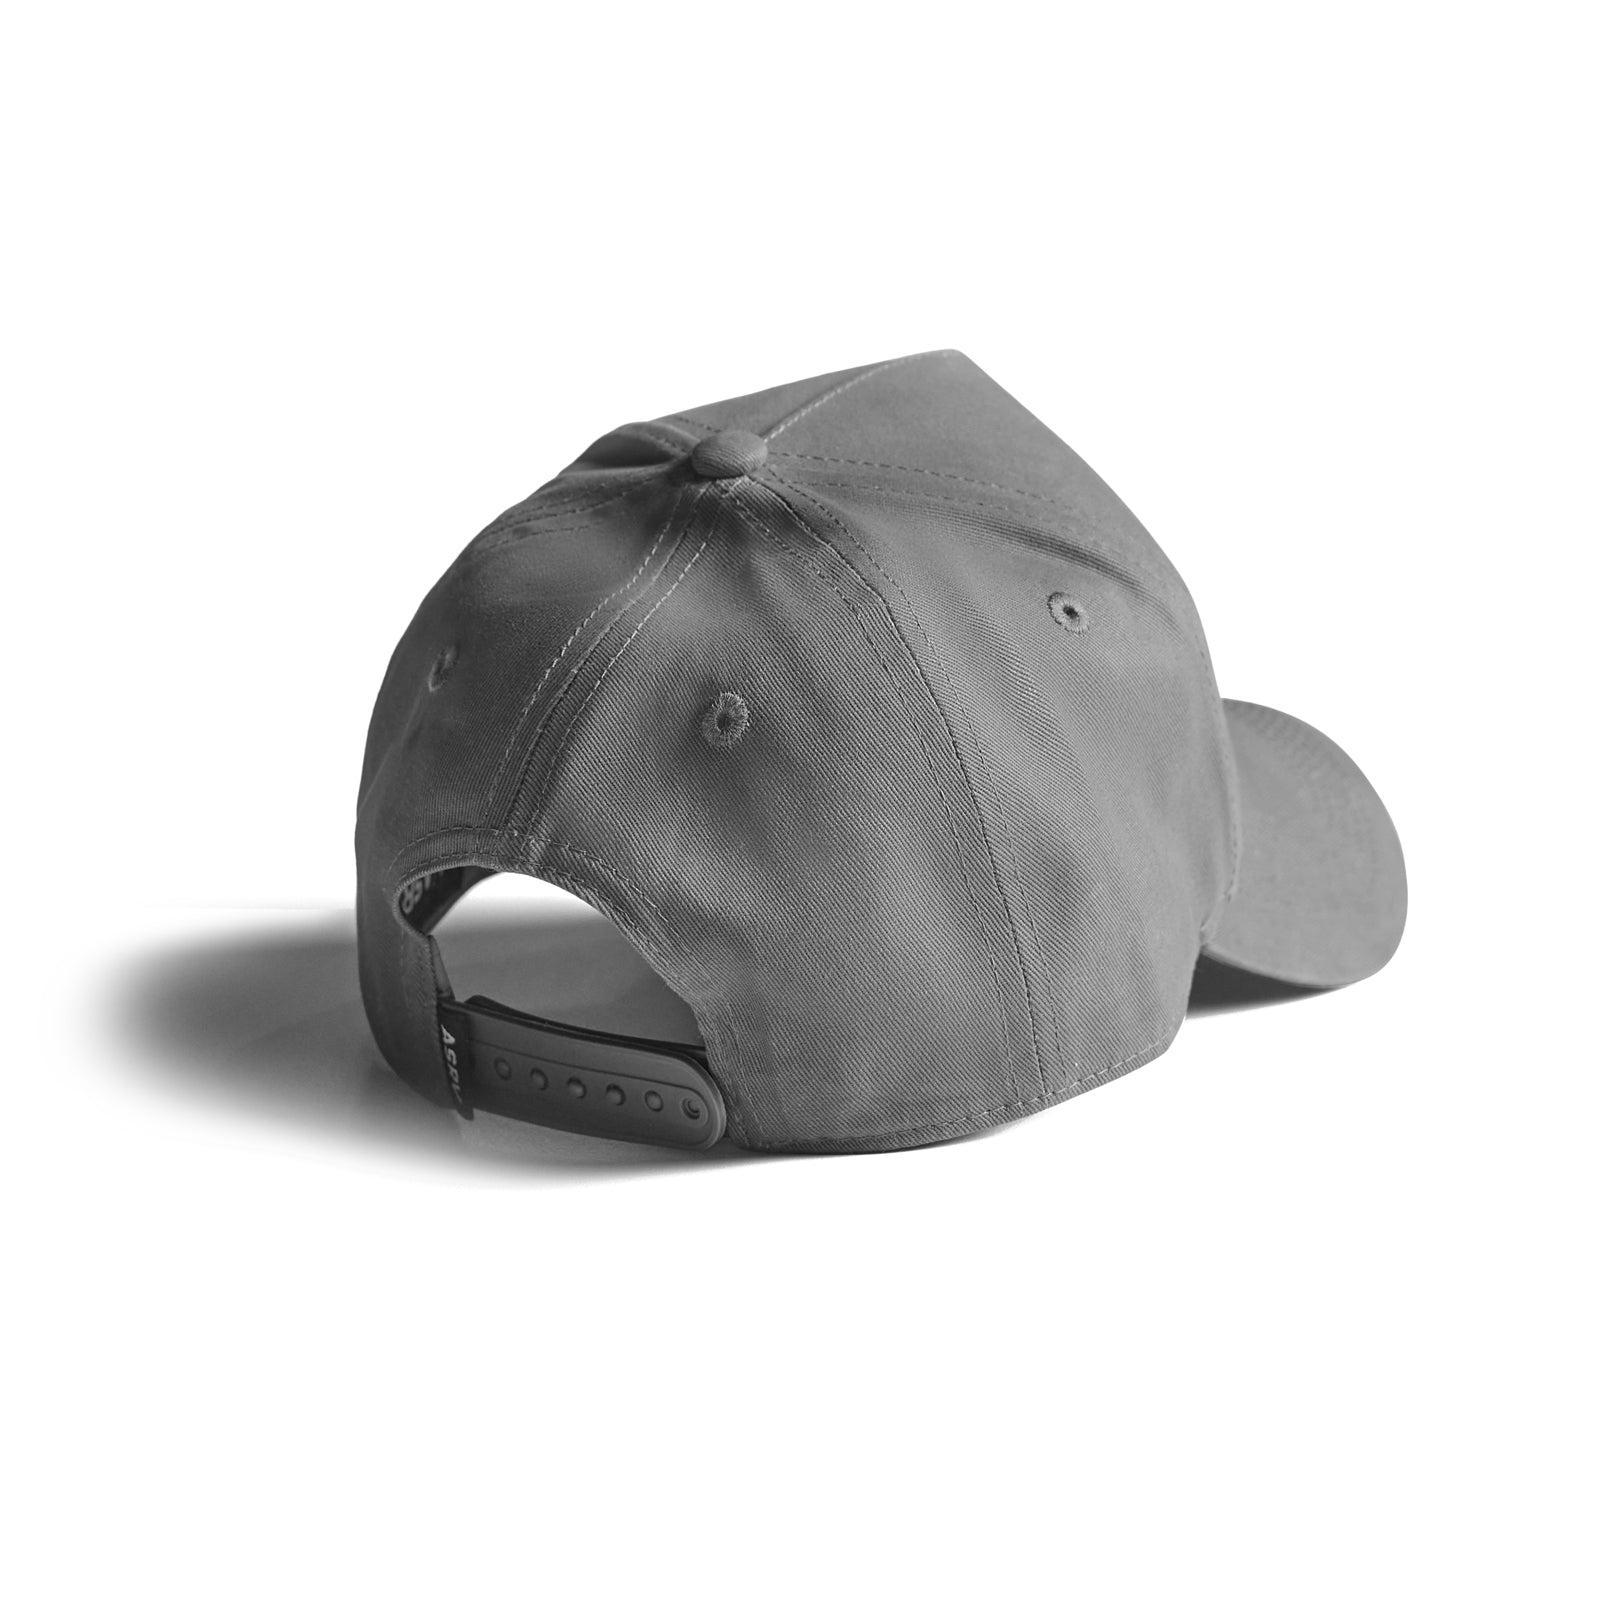 0815. A-Frame Hat - Grey/Grey "Wings" Product Image